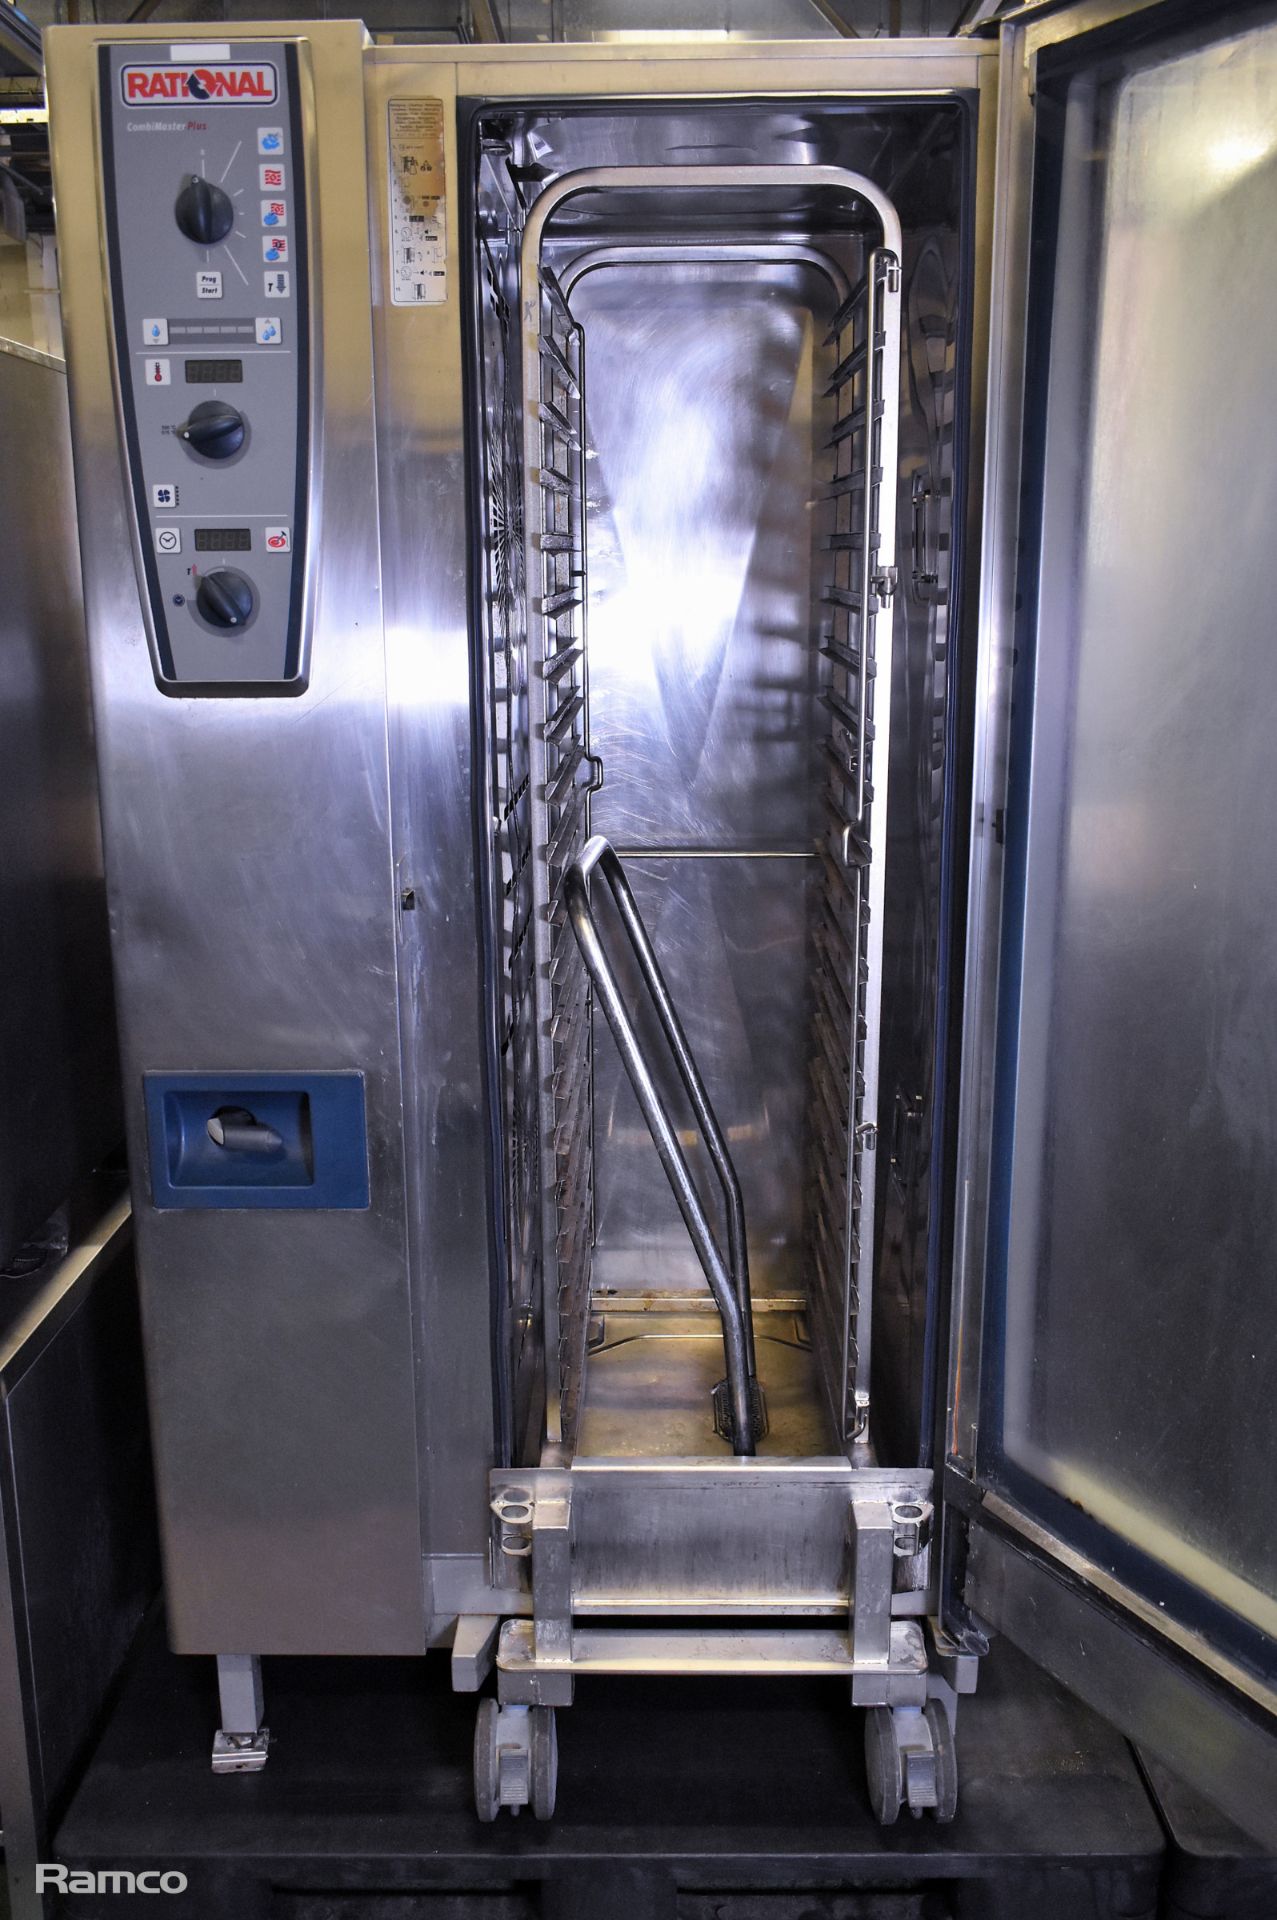 Rational CombiMaster Plus CMP 201G stainless steel 20 grid combi oven - W 880 x D 1000 x H 1850mm - Image 3 of 8